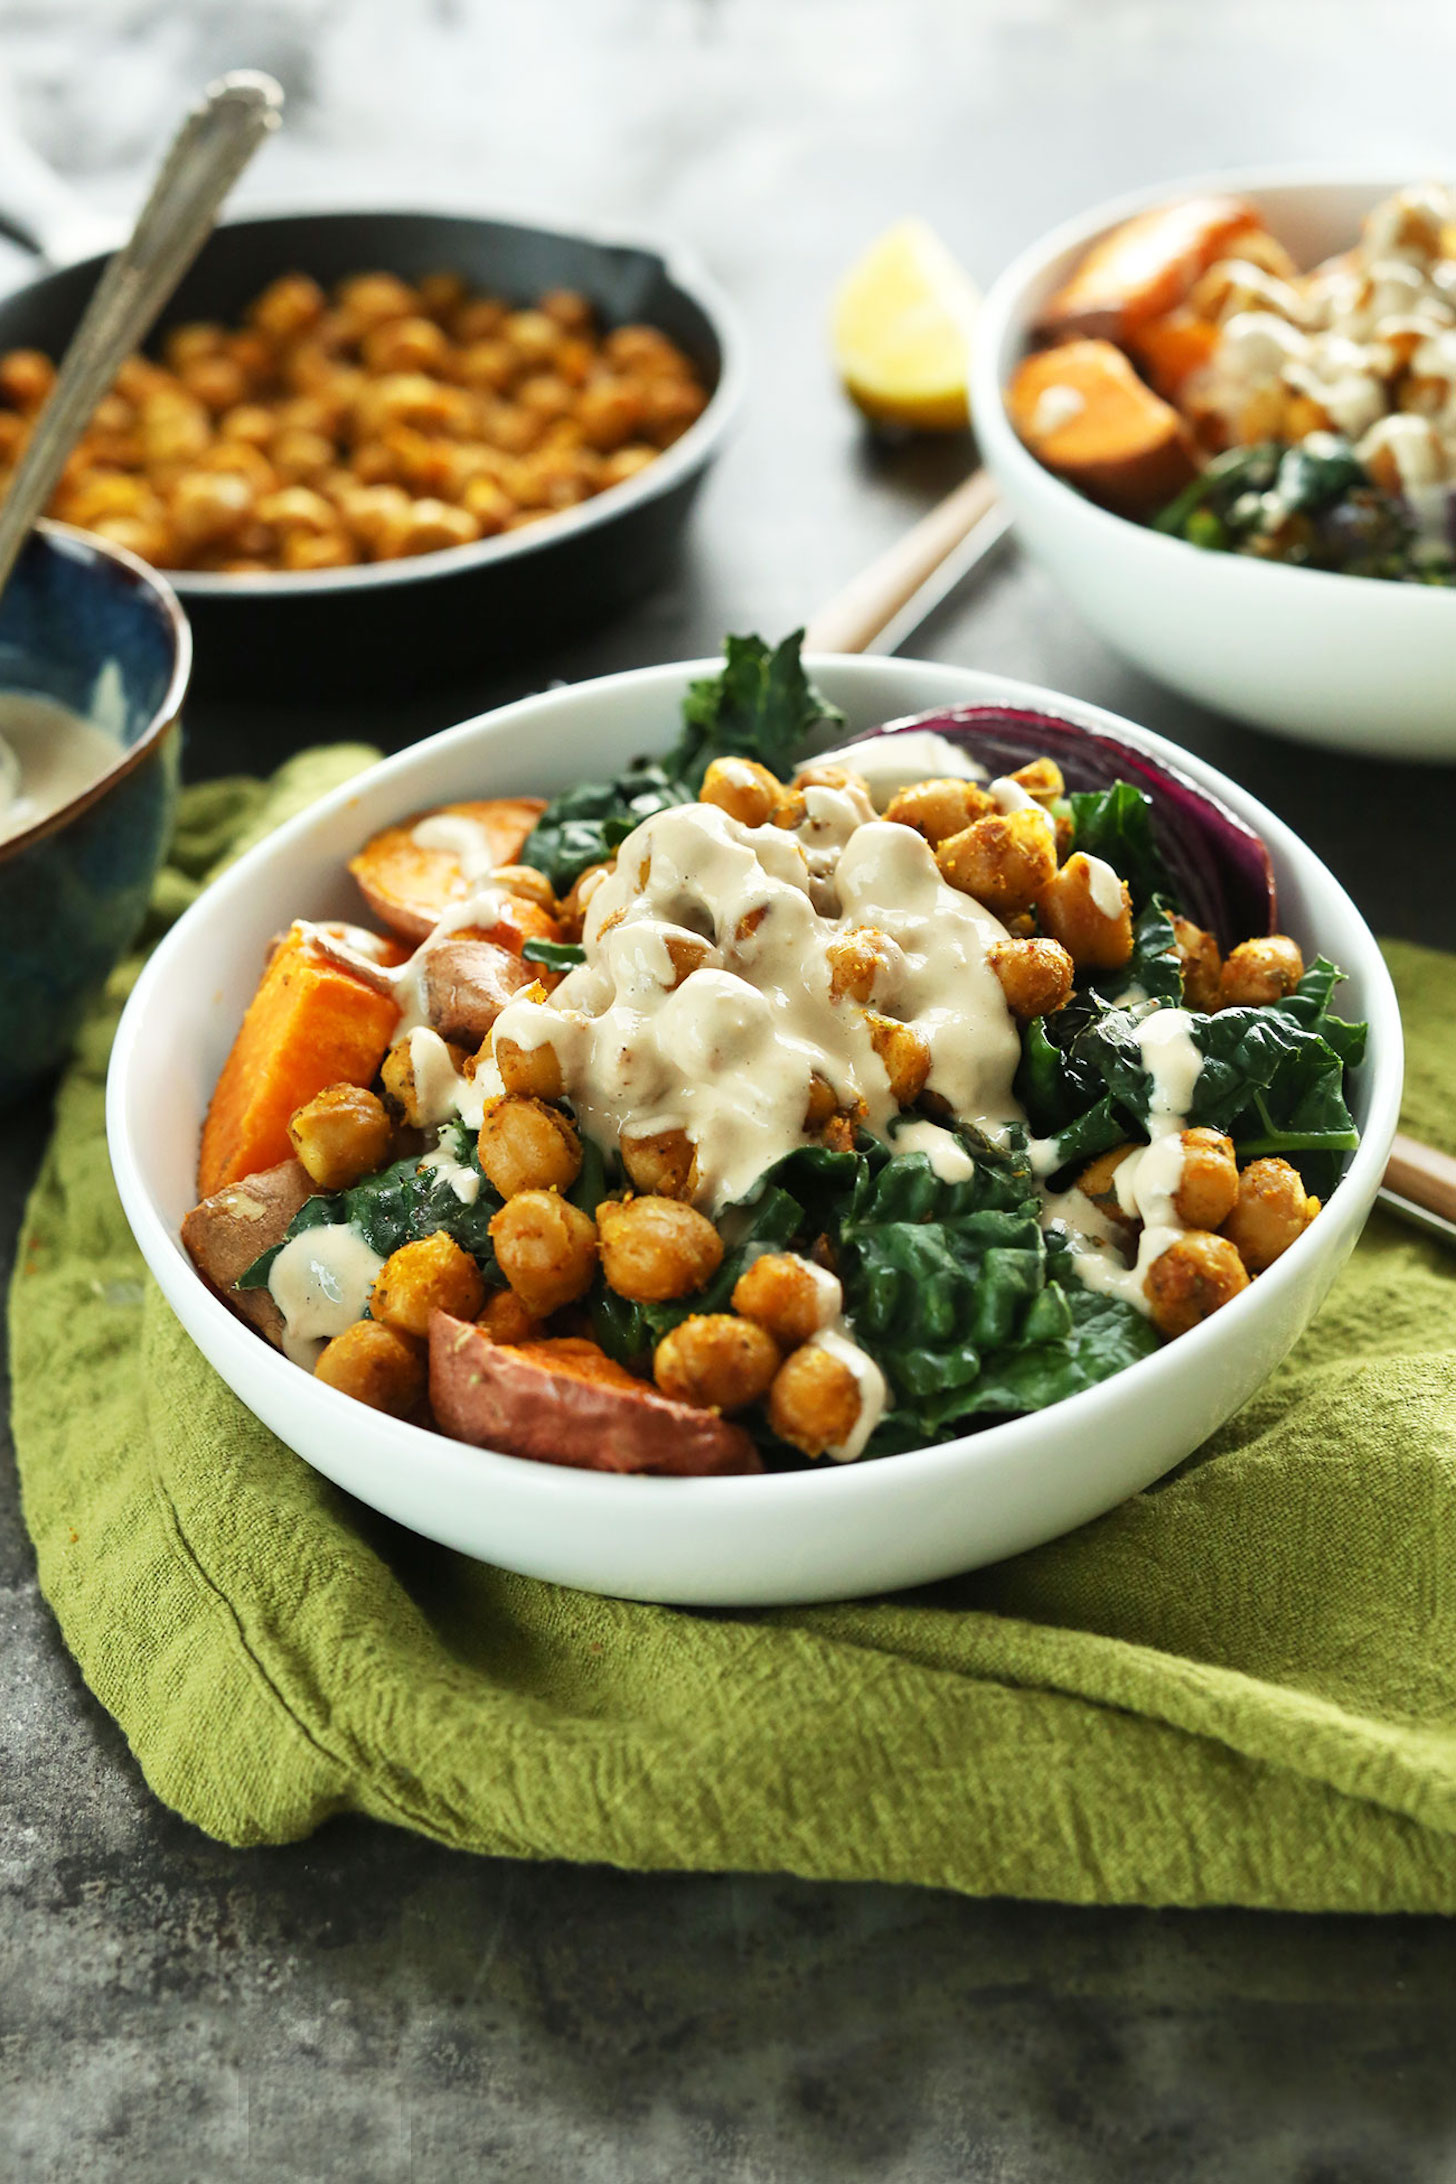 How to Create a Perfect Vegan Lunch Bowl - The Full Helping